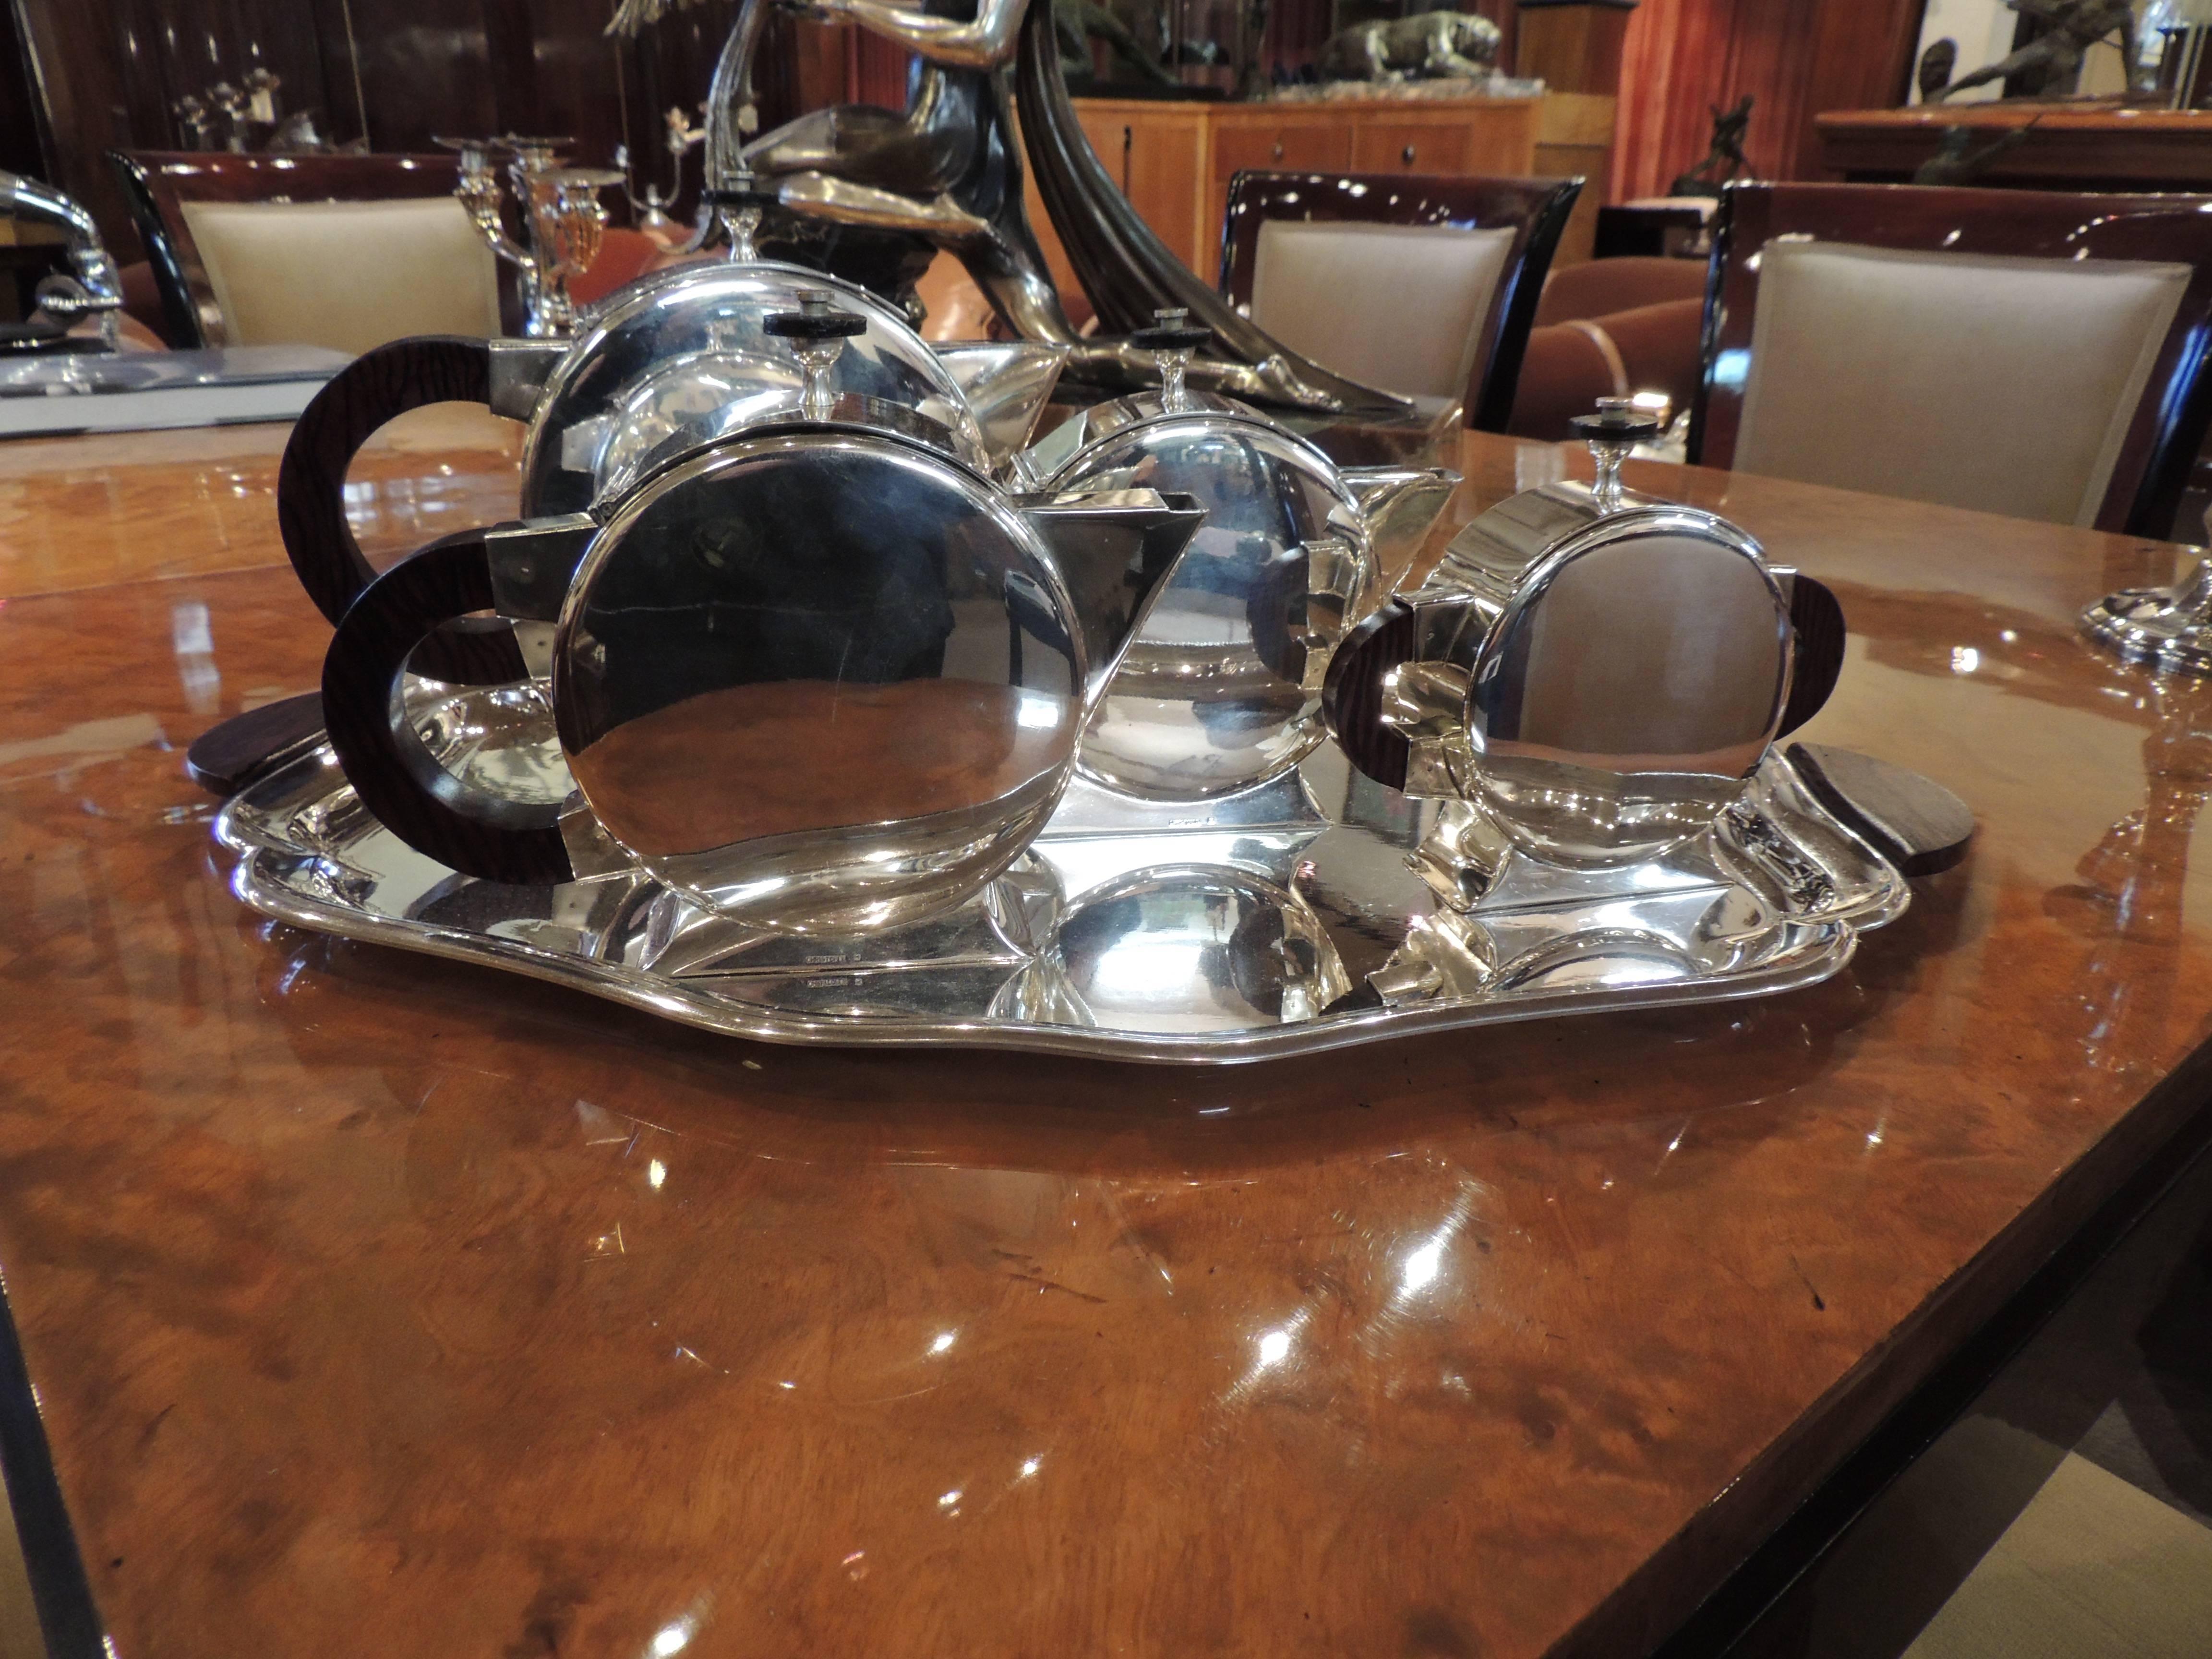 In 1930 for Christofle and was used in the ultimate setting of Deco Luxury- the great French ocean liner Normandie.

The unusual round, and voluptuous shape of the teapot, coffee pot and creamer are streamlined style at its best! Heavily plated in